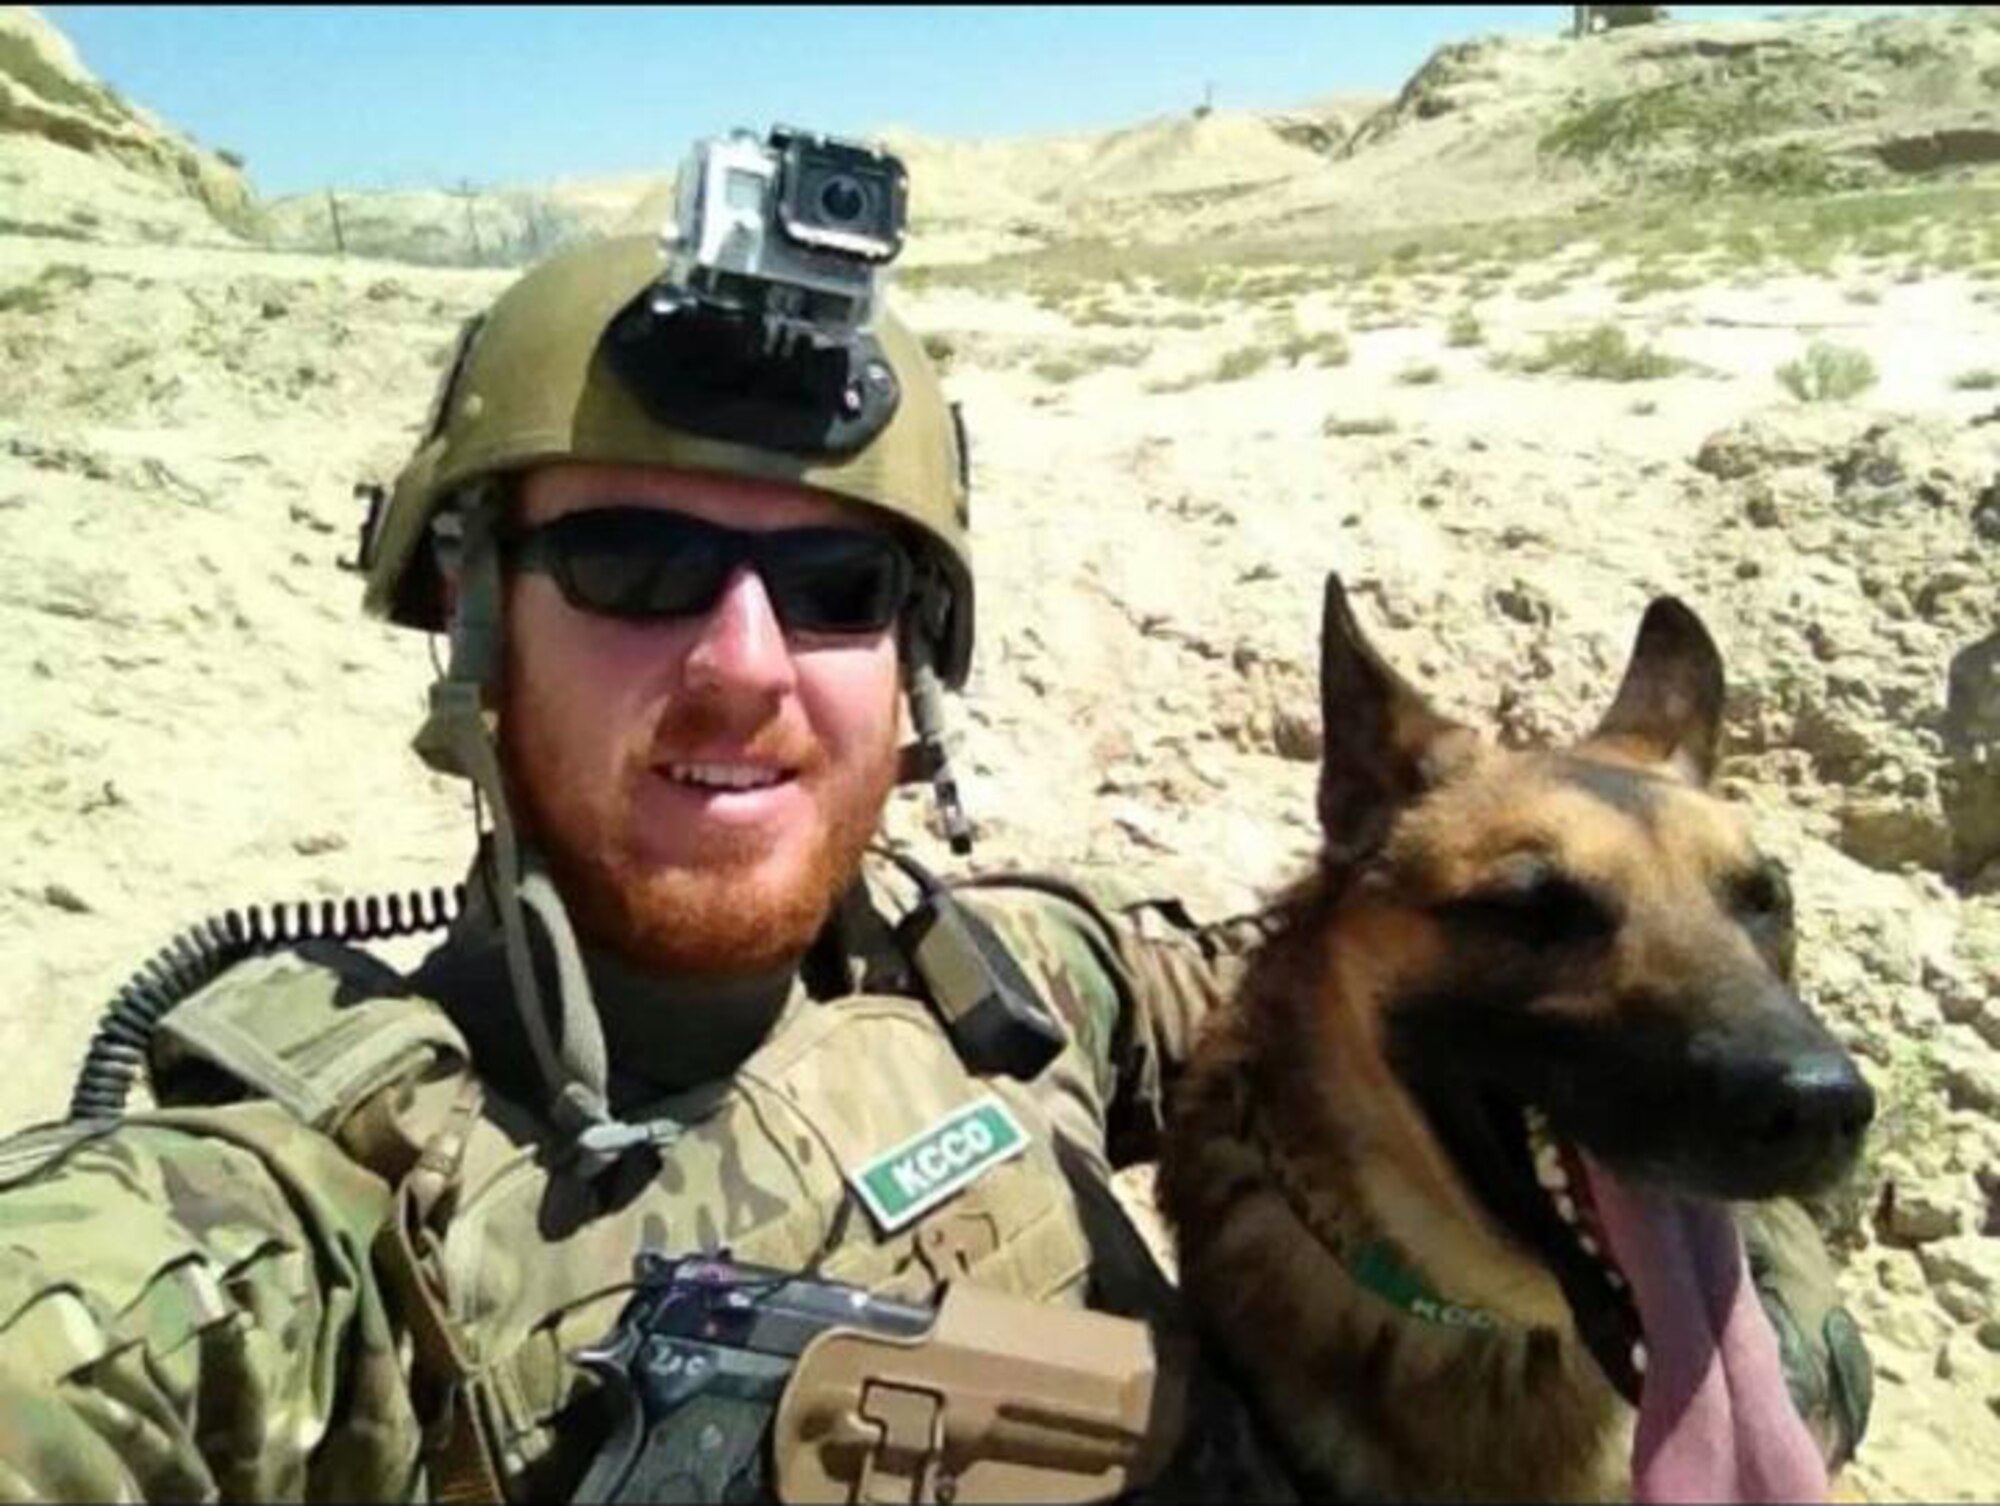 U.S. Air Force Senior Airman Brandon Johnson, 822nd Base Defense Squadron Military Working Dog handler, and MWD Diyi from Moody Air Force Base, Ga., take a photo while deployed to Afghanistan May 2013. During a deployment in 2012, Johnson and Diyi were assigned to the 7th Special Forces Group out of Eglin AFB, Fla. at a village stability platform where they worked with Army special forces and lived with the local villagers. This deployment resulted in Diyi developing canine post traumatic stress disorder. (Courtesy photo) 